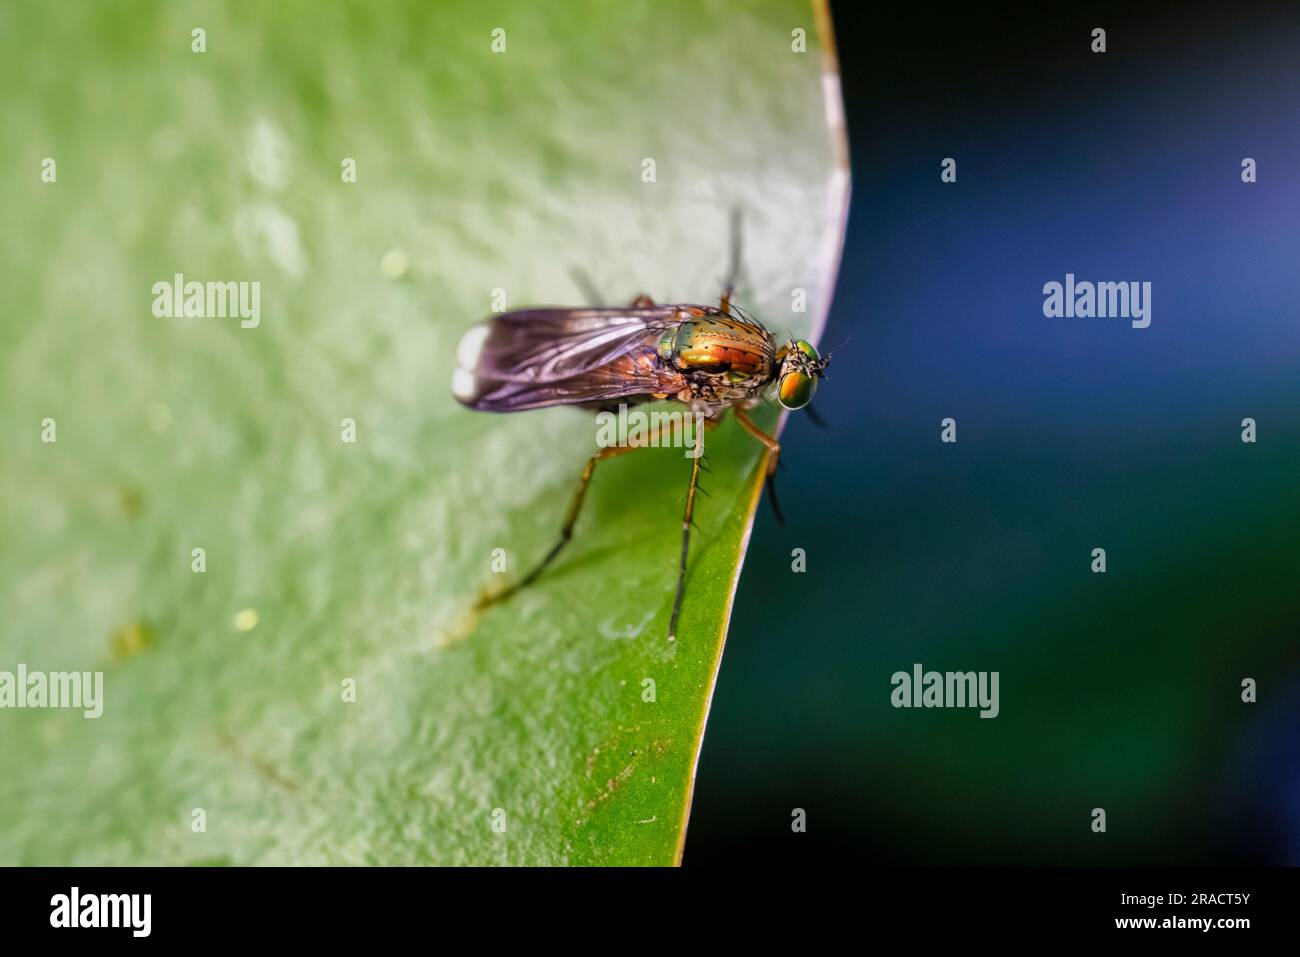 An iridescent Semaphore fly (Poecilobothrus nobilitatus) at rest on a green water lily leaf in garden pond in Surrey, south-east England in summer Stock Photo